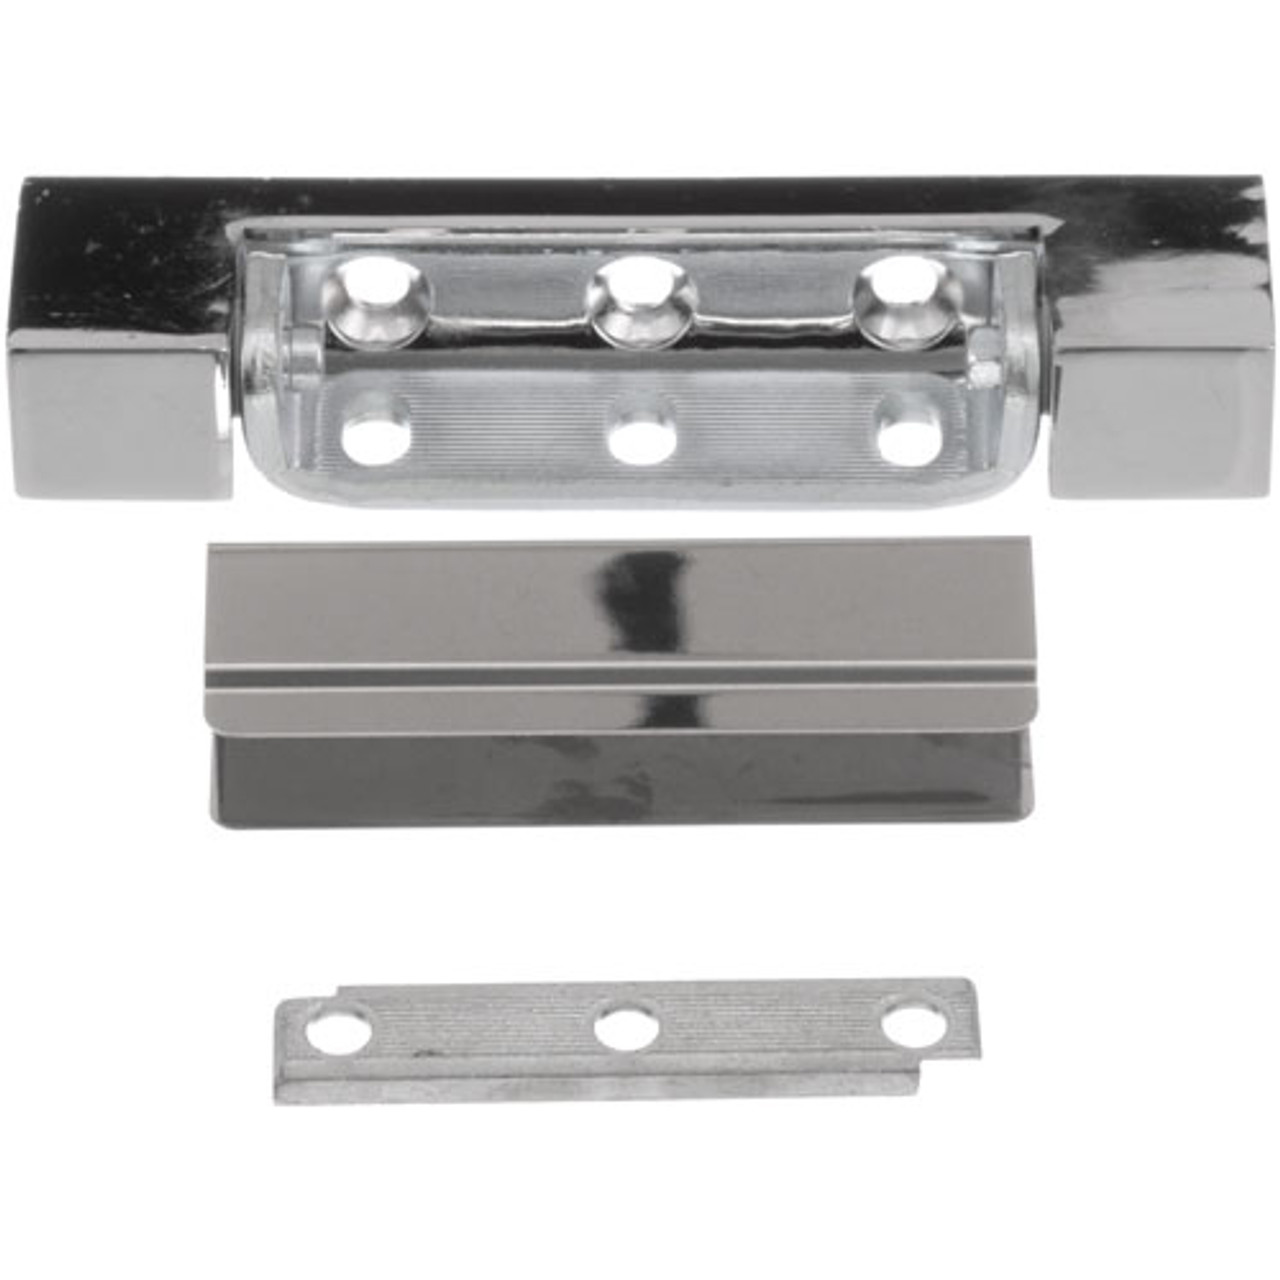 Hinge - Replacement Part For Hobart 00-261629